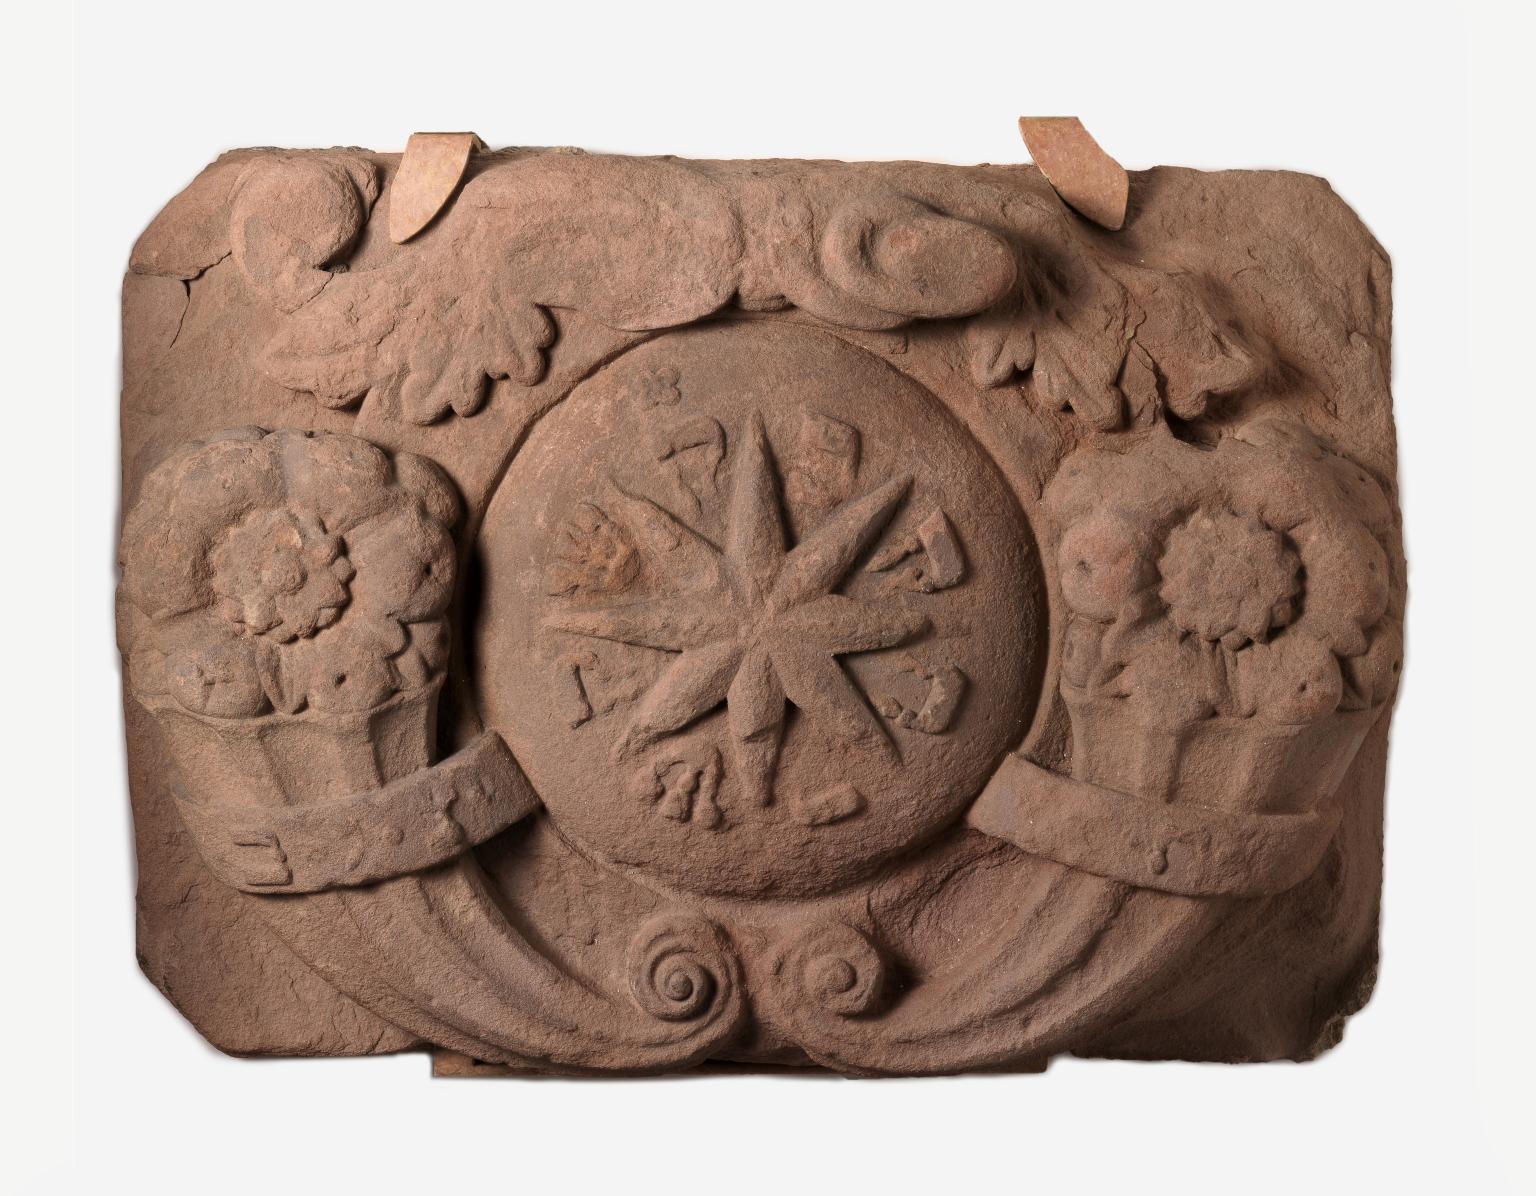 Stone with carving of star in center and flowers on either side.